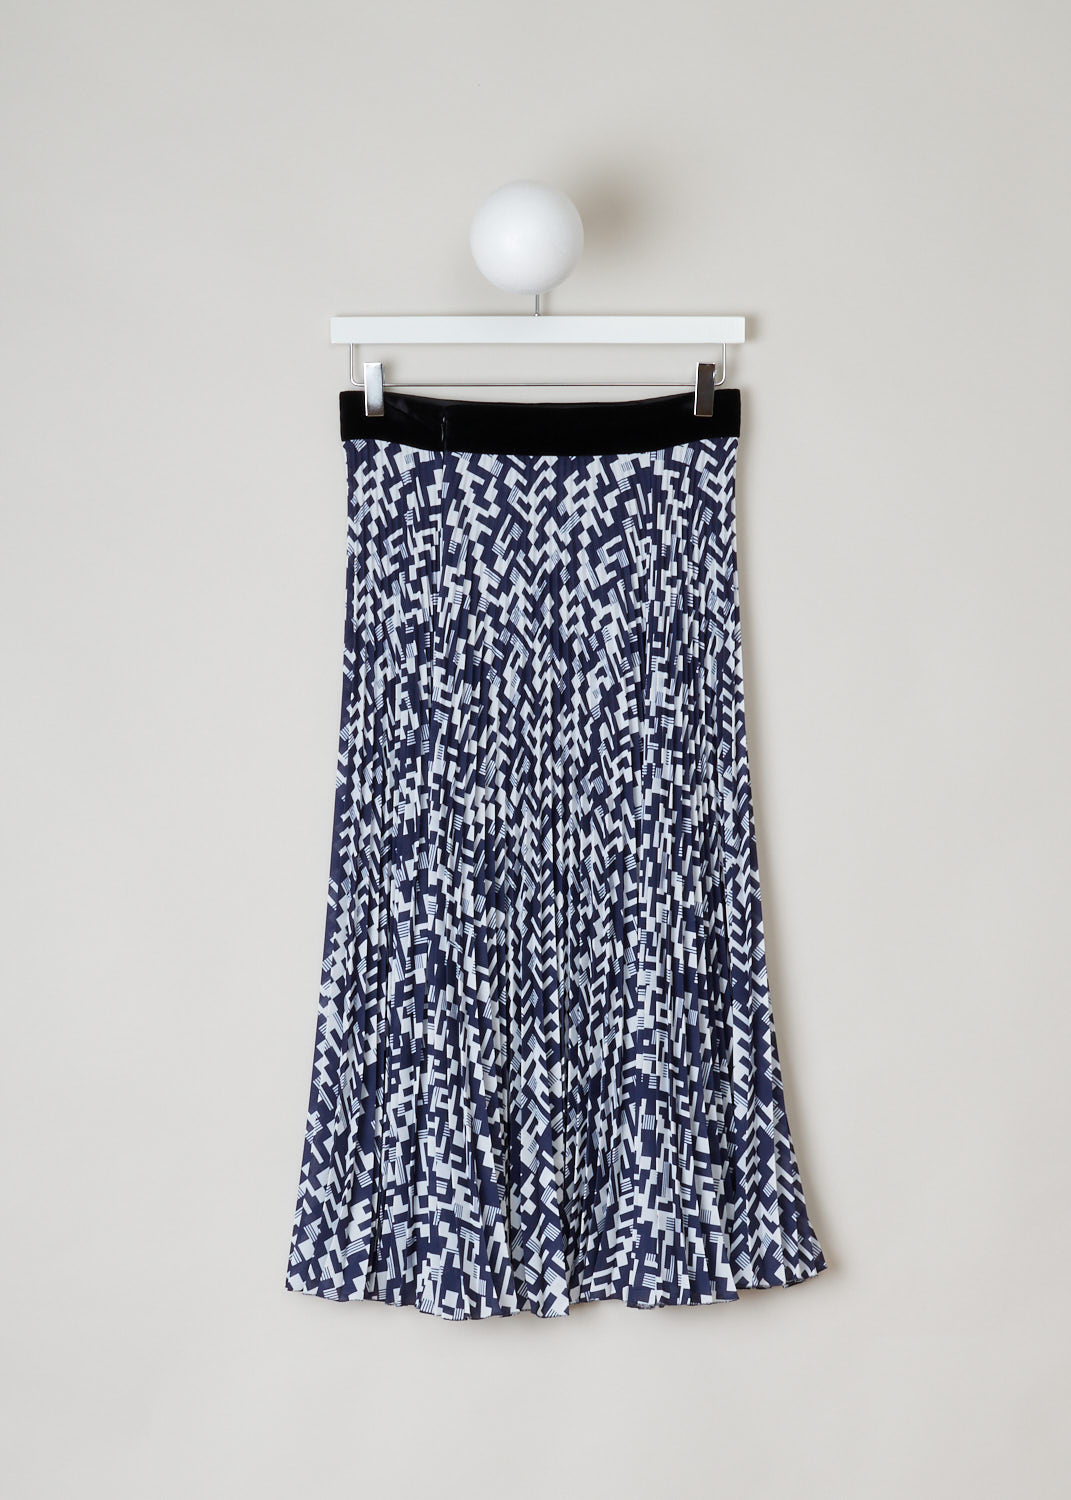 Prada, Geometric print skirt in blue and white, sable_leg_patte_P135R_F0216_baltico, blue, white, back, Geometric design with contrasting colors, which makes the print come to life. Featuring an accordion pleat model, and a waistband made from black velvet material with two ivory colored buttons. There is a concealed zipper on the back for fastening. 